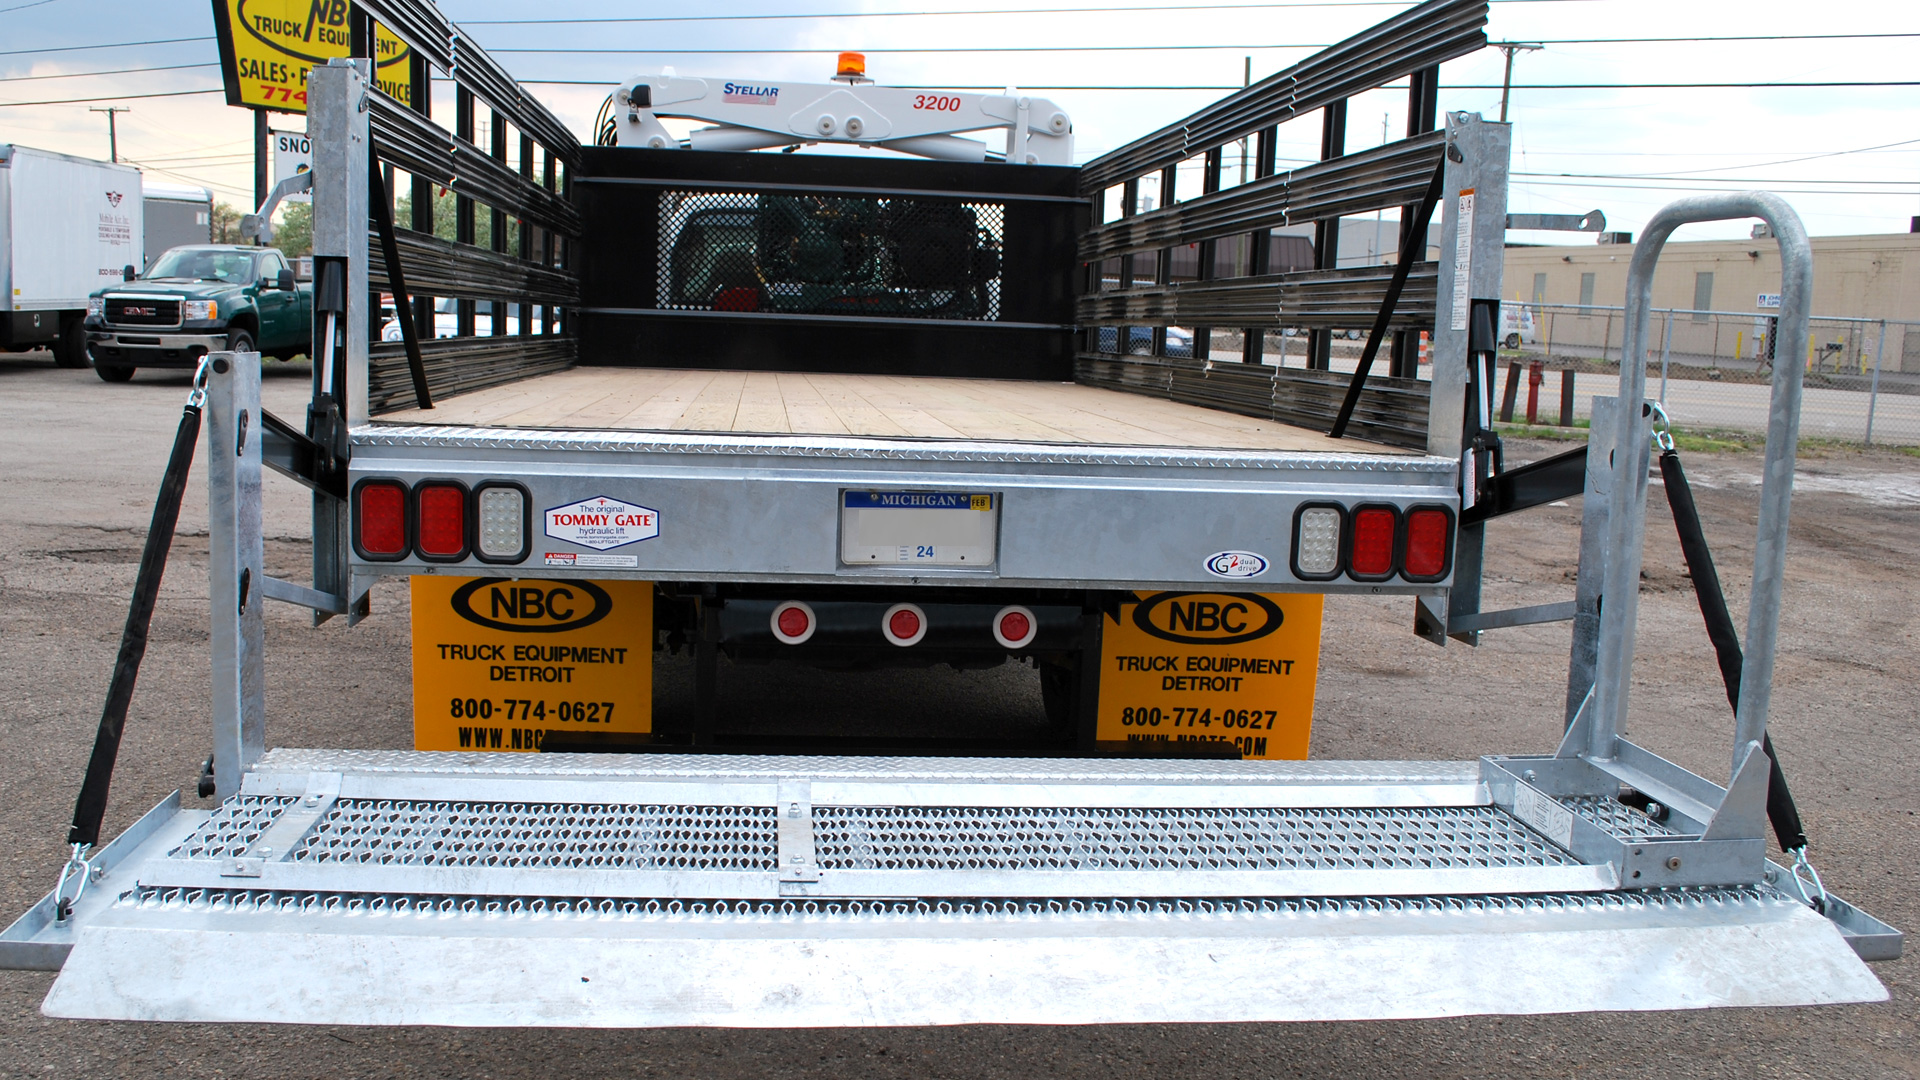 Tommy Gate G2 Series Liftgates For Box Trucks Flatbeds And Vans